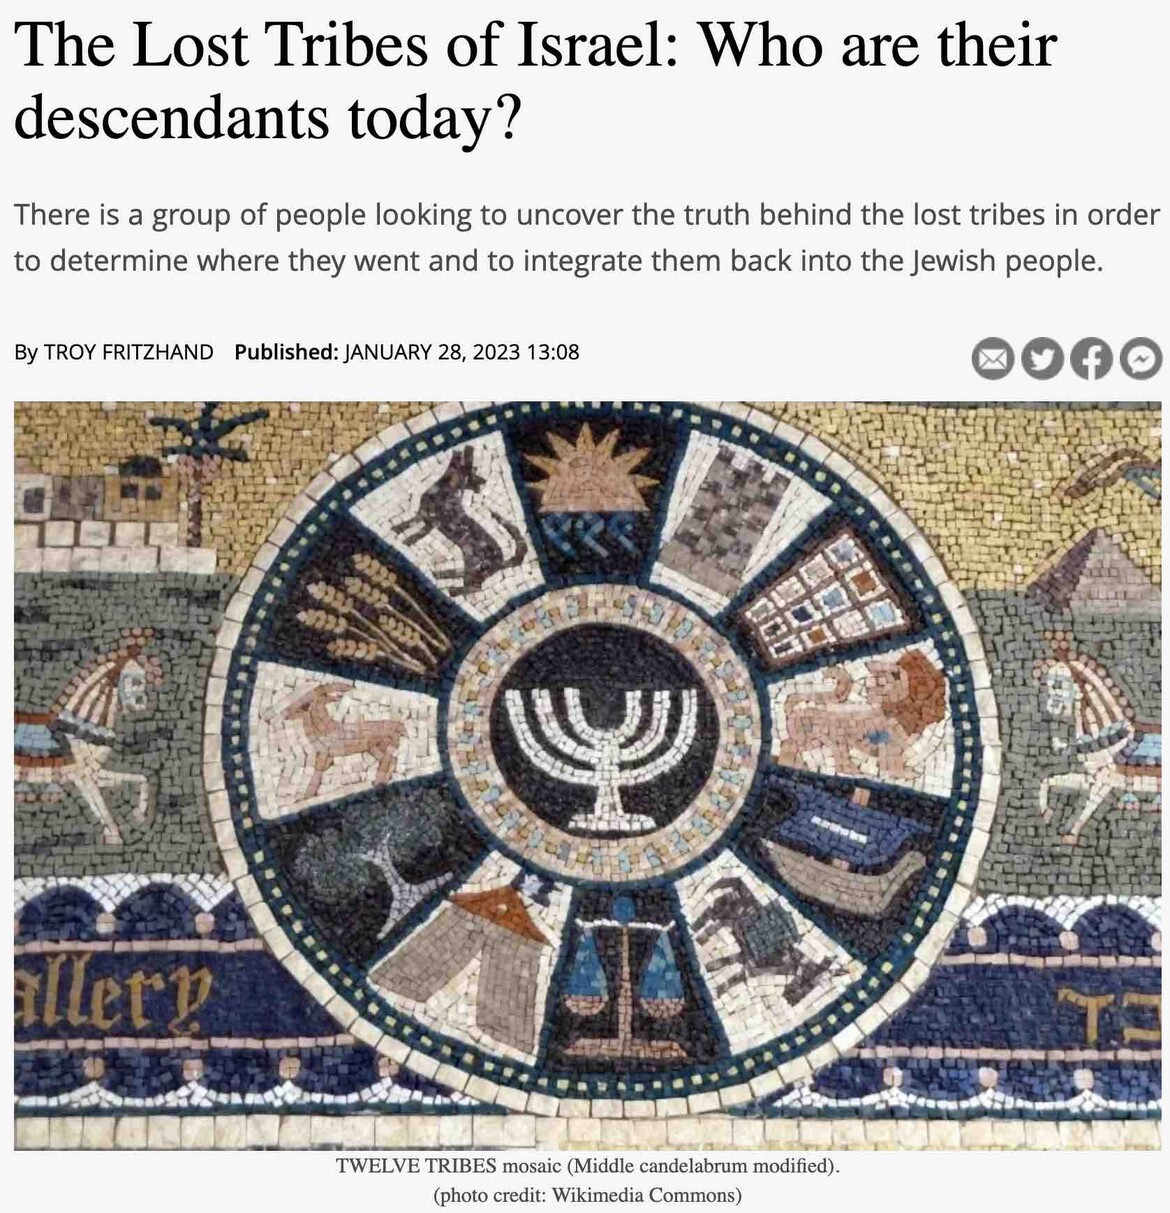 The Lost Tribes of Israel